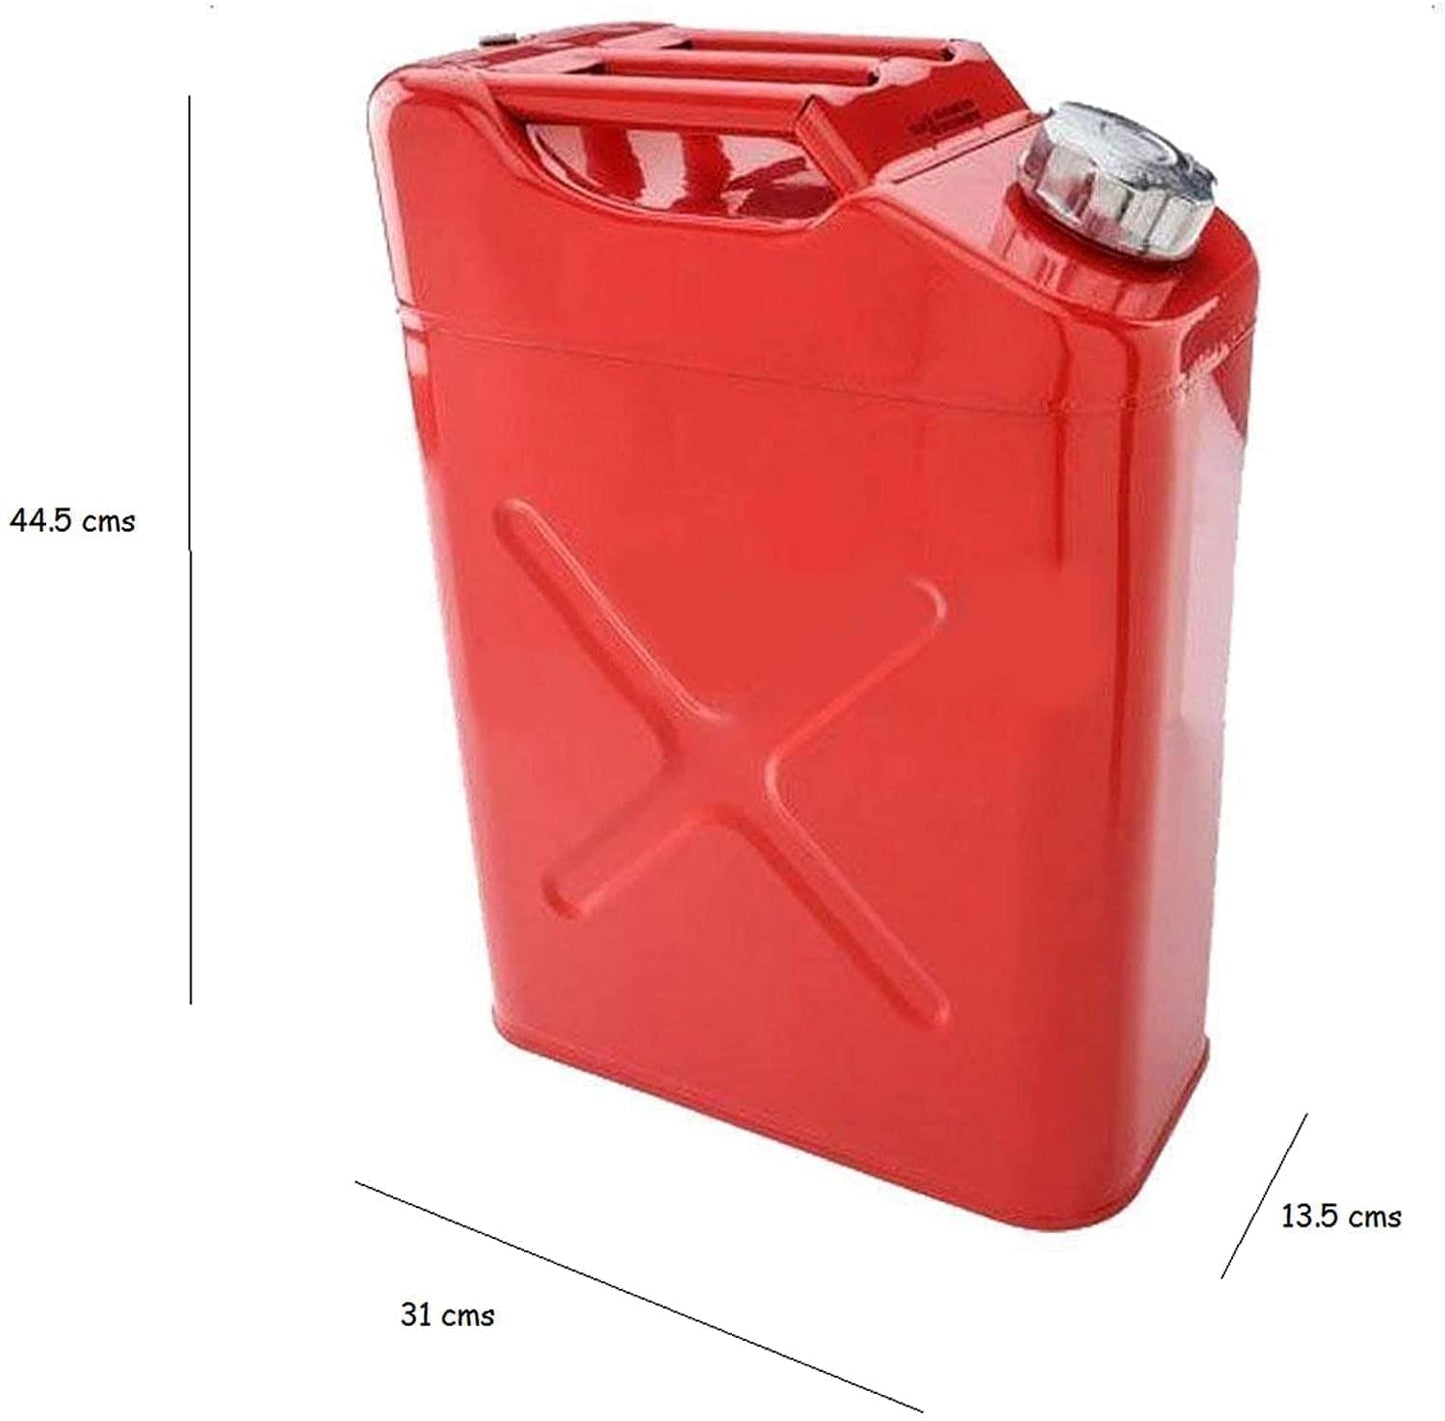 20L 5 Gallon Steel Fuel Gasoline Petrol Diesel Jerry Can Tank Container Backup (1)